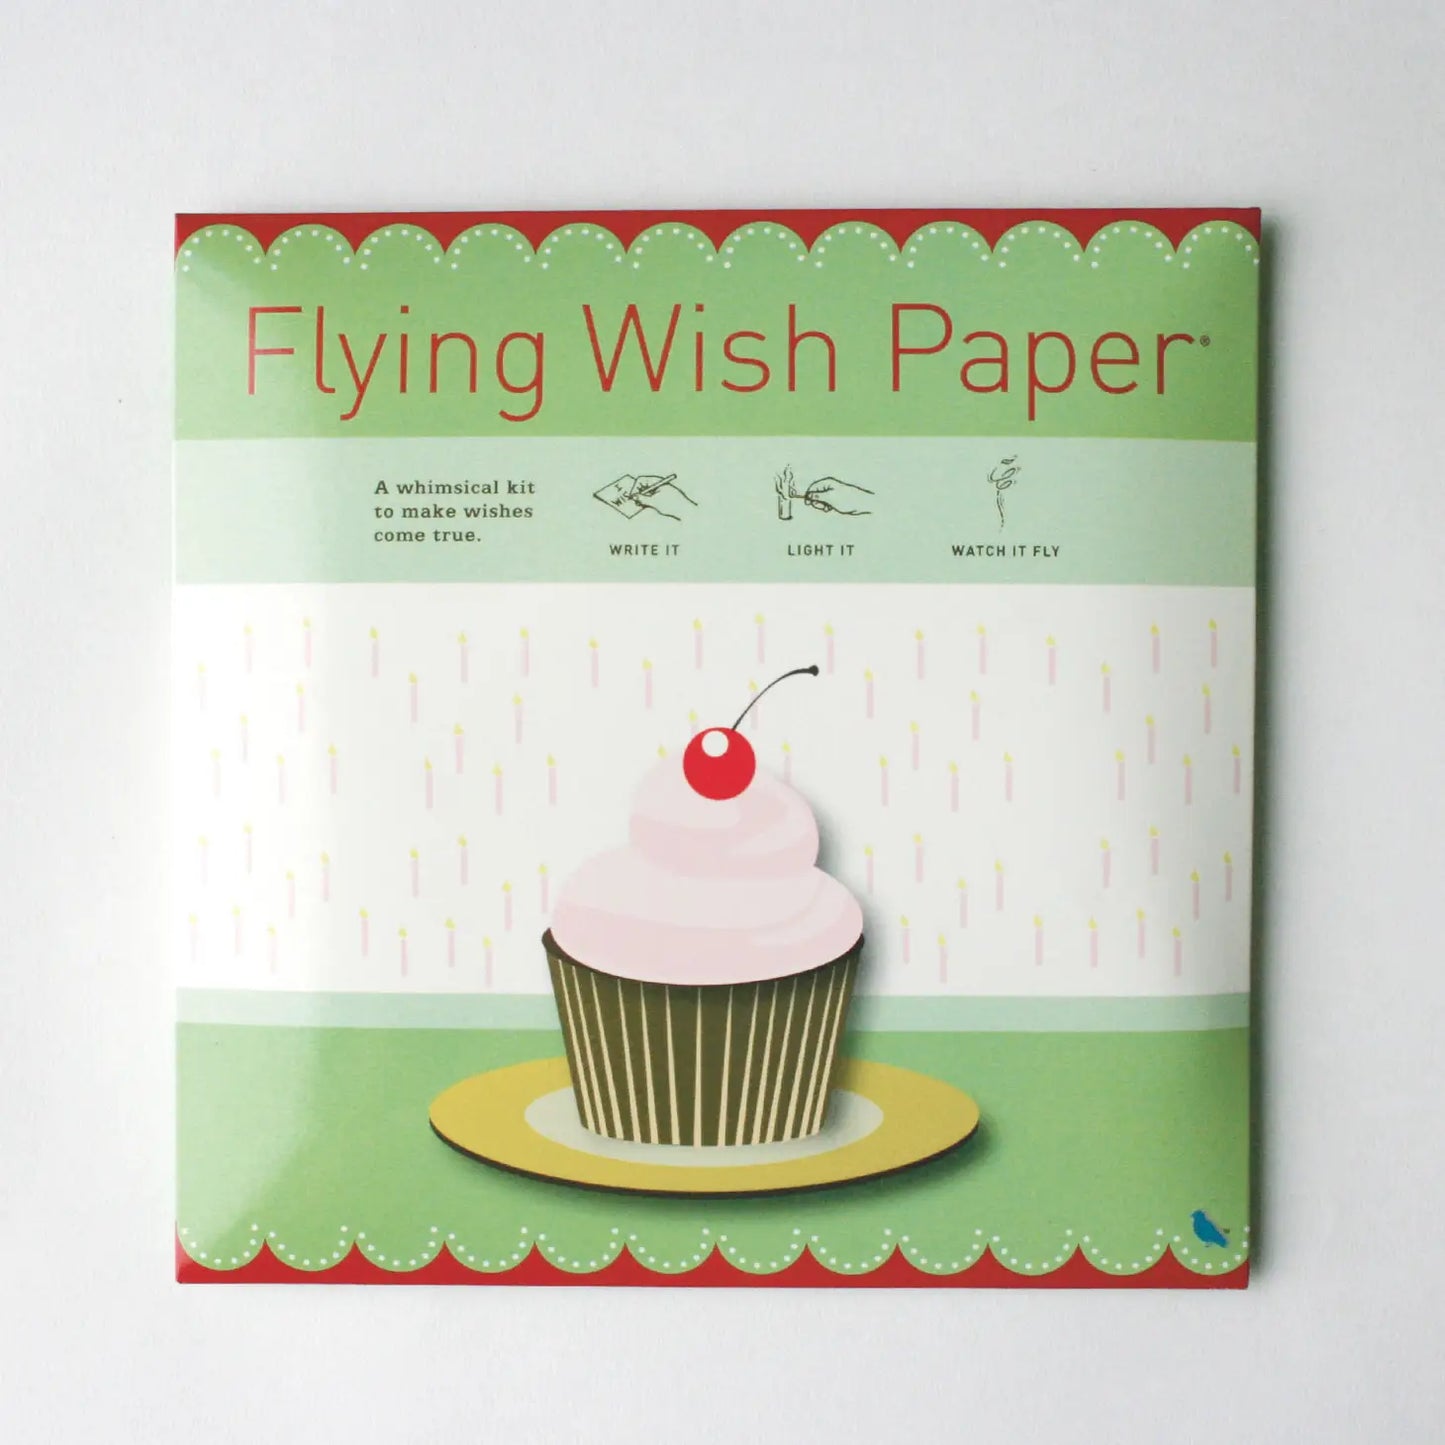 FLYING WISH PAPER 'Birthday Cupcake' / Large Kit with 50 Wishes + accessories